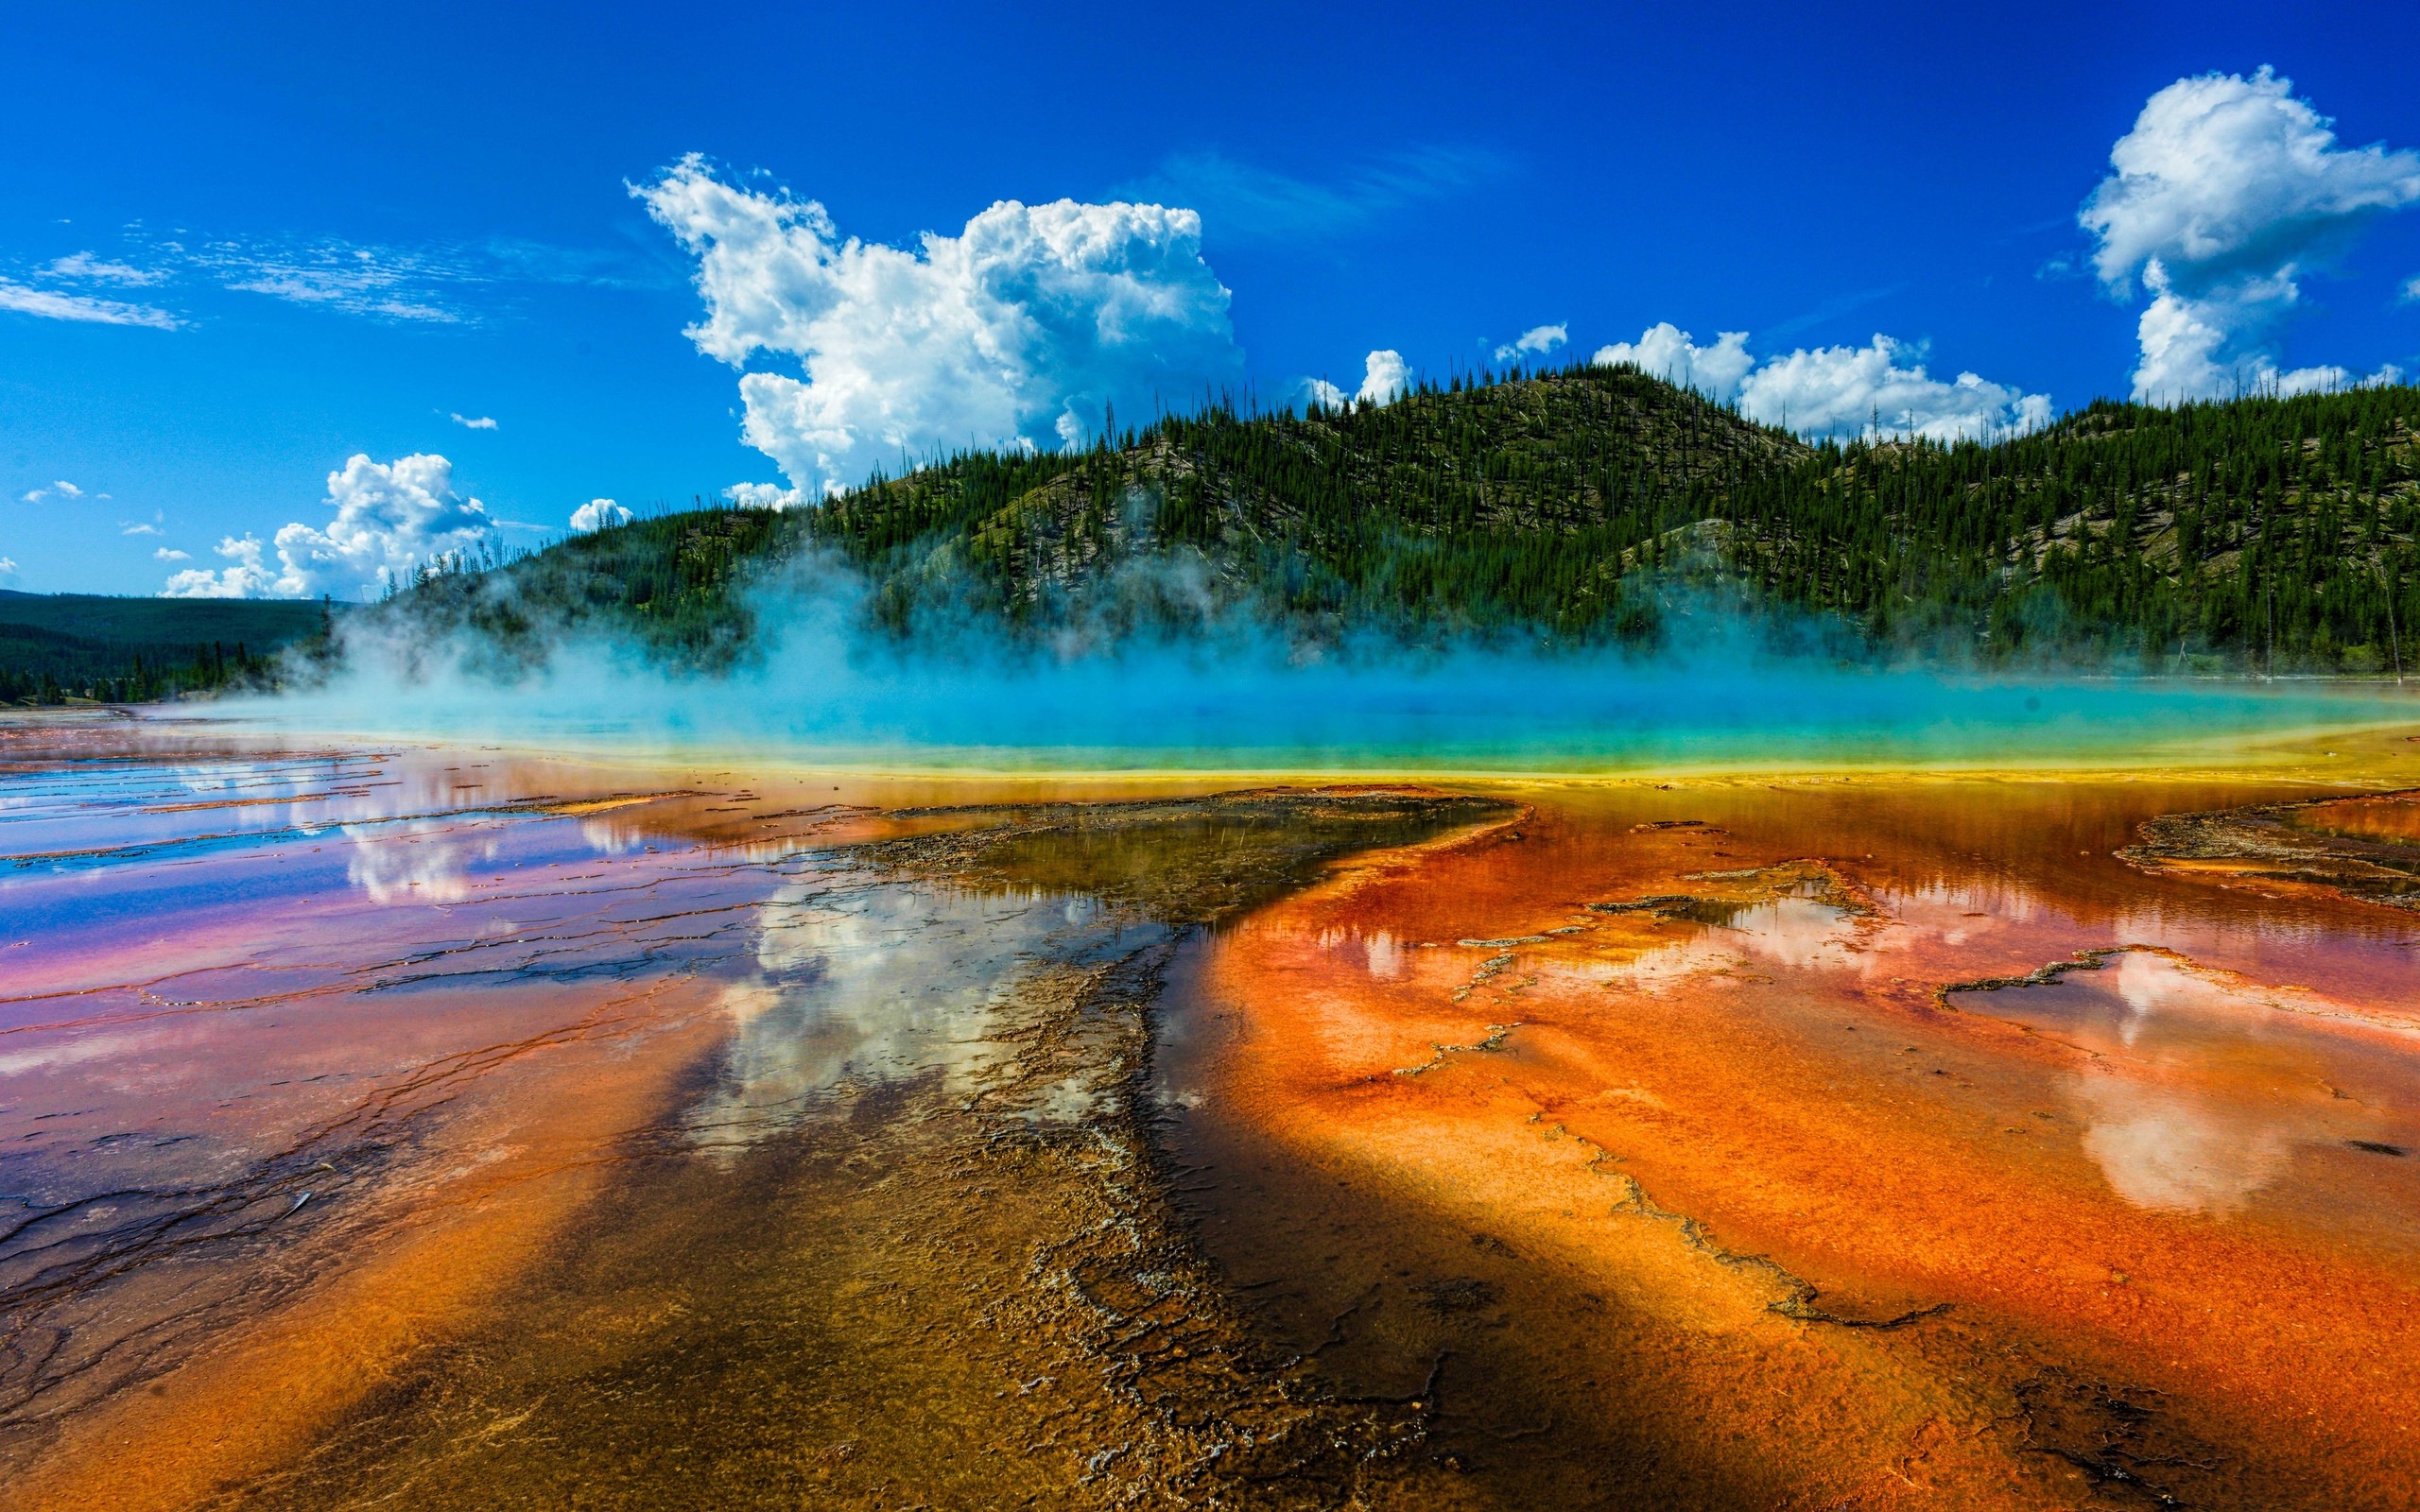  Hot  Spring  Full HD Wallpaper  and Background Image 